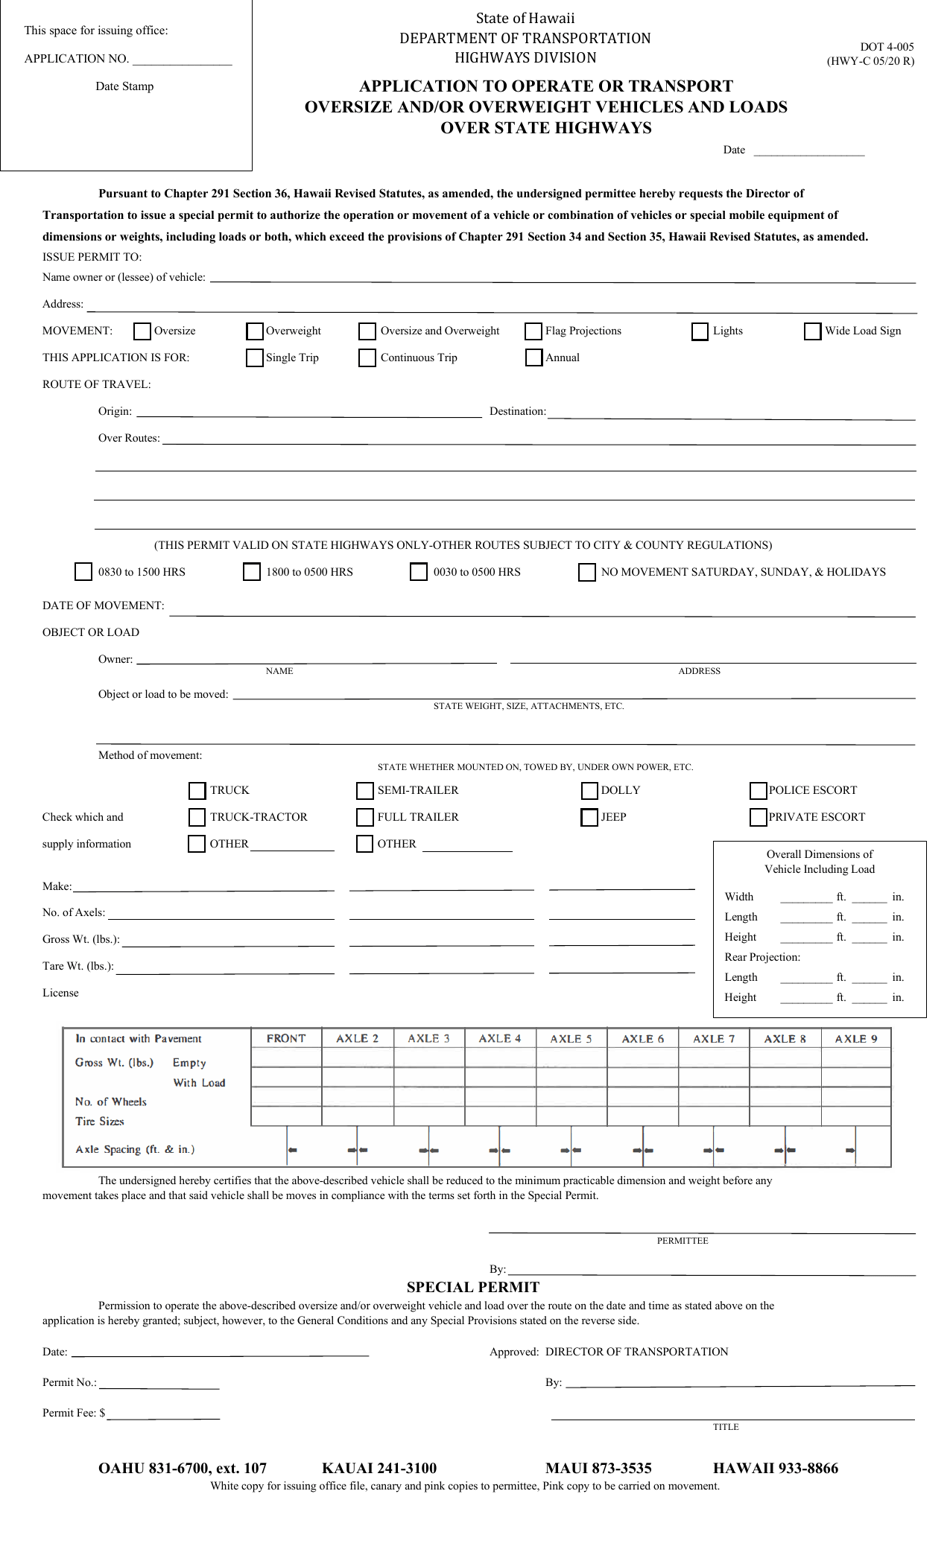 Form DOT4-005 Application to Operate or Transport Oversize and / or Overweight Vehicles and Loads Over State Highways - Hawaii, Page 1